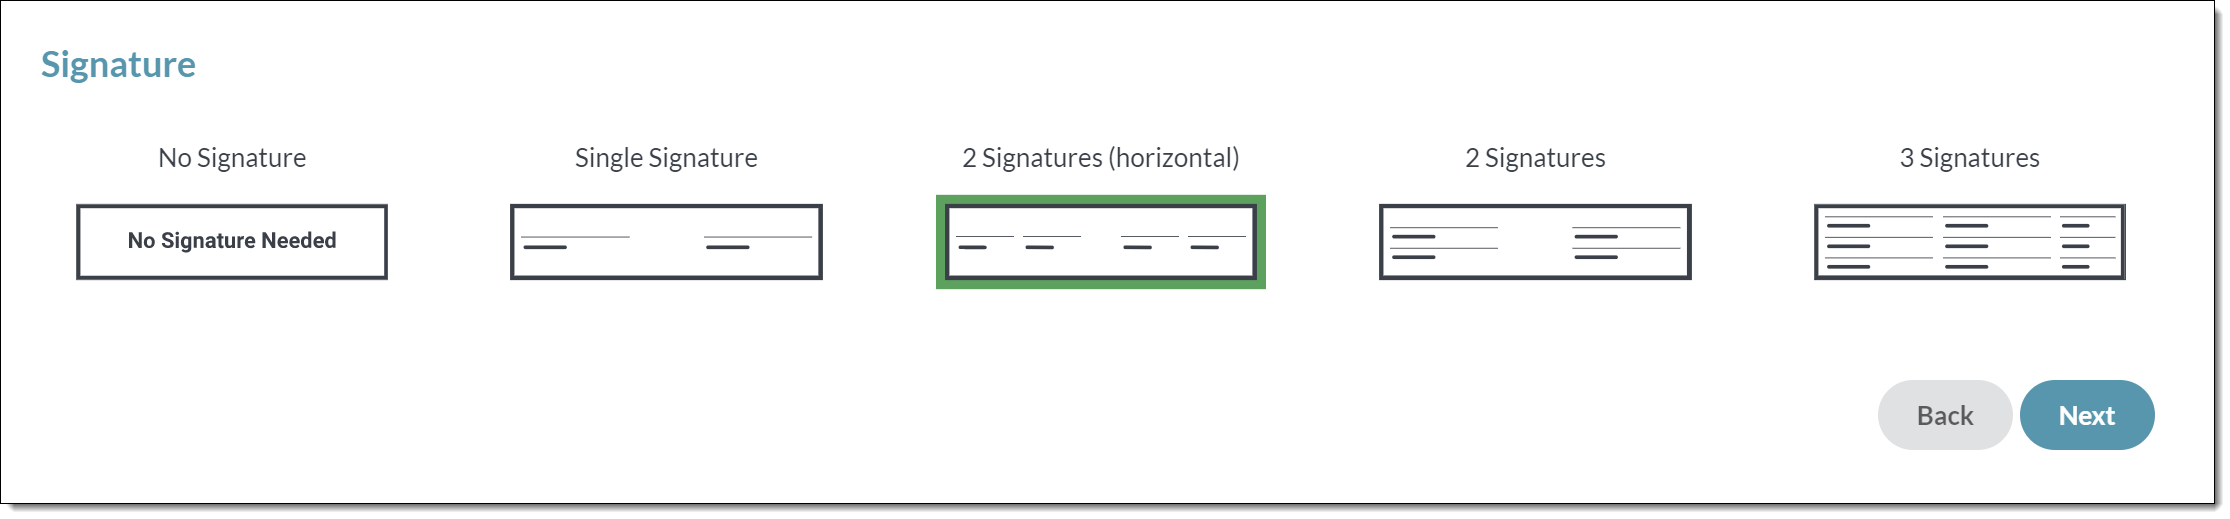 New ability to add multiple signatures horizontal instead of vertical